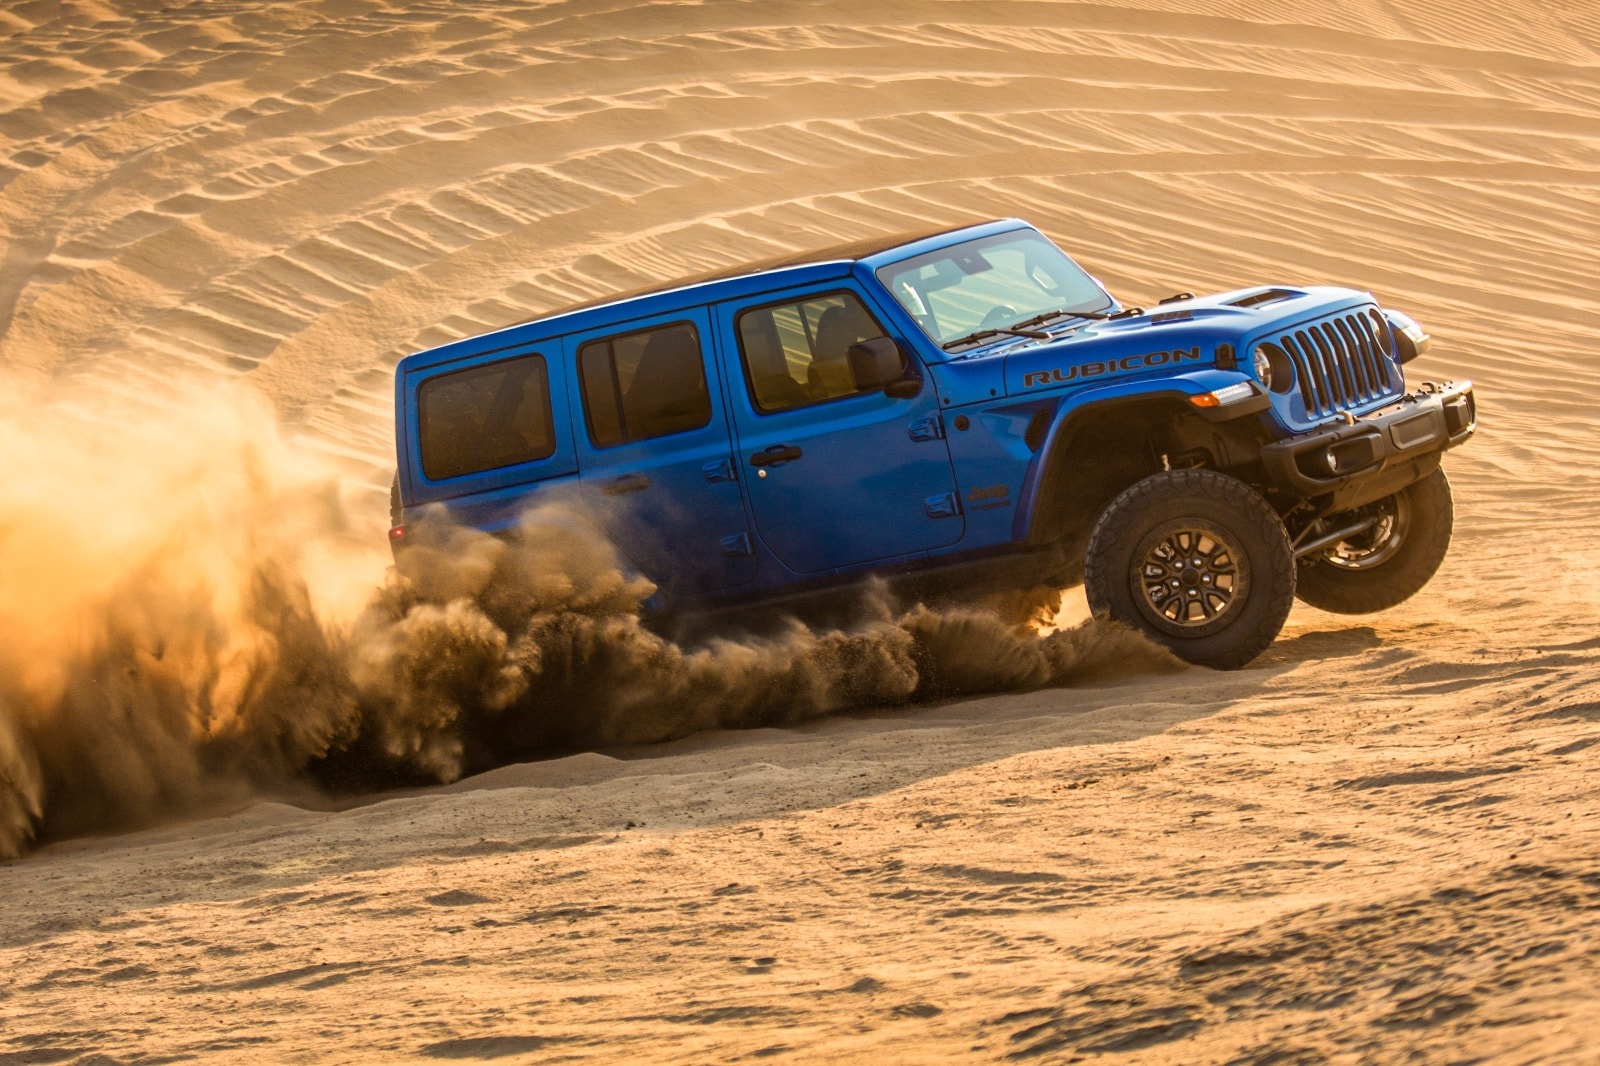 TESTED: 2021 Jeep Wrangler Unlimited Rubicon 392 - How Fast Is the Wrangler V8?